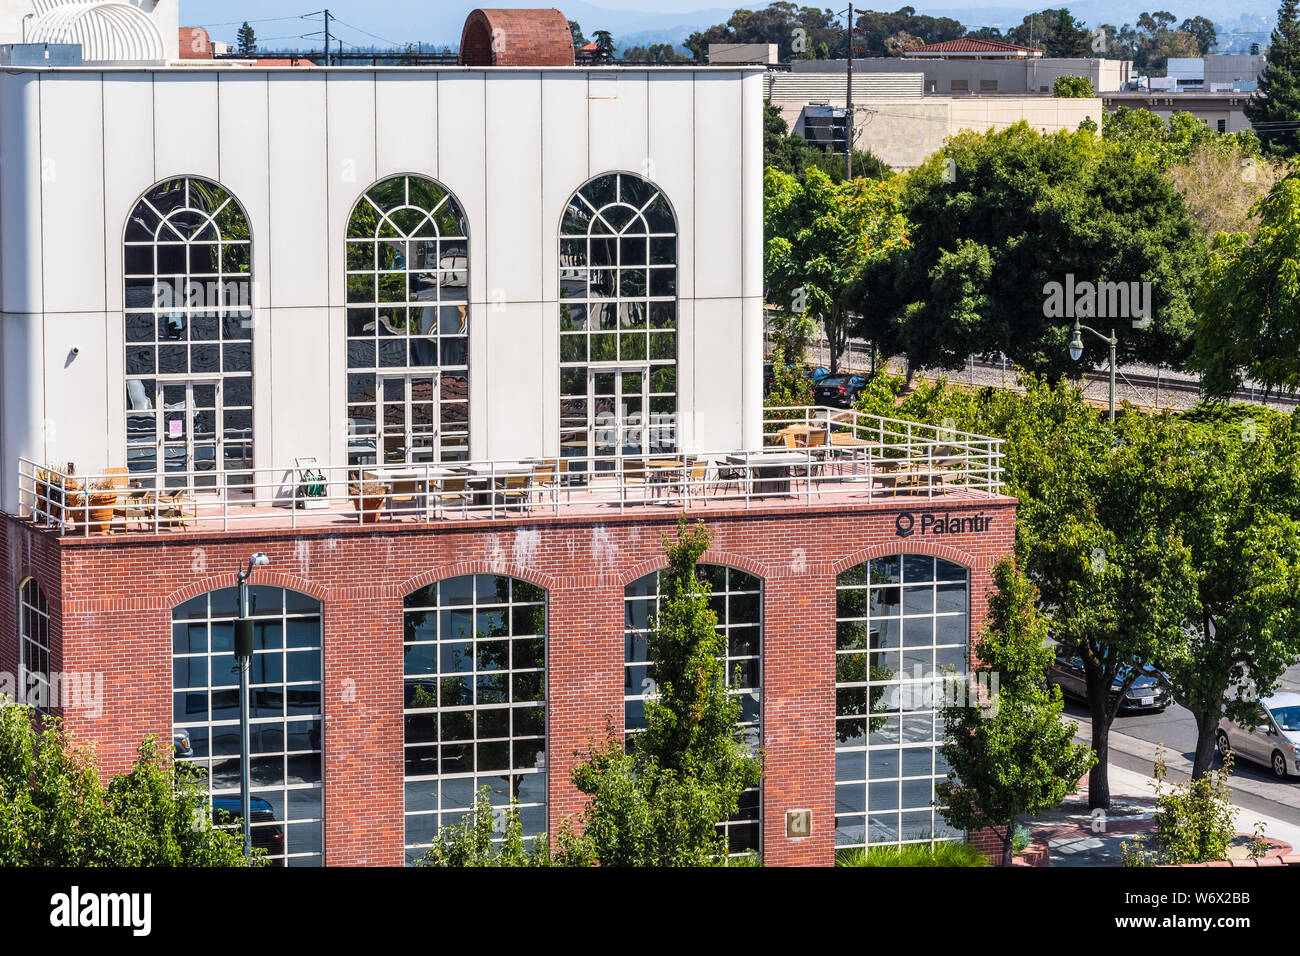 July 30, 2019 Palo Alto / CA / USA - Palantir headquarters in Silicon Valley; Palantir Technologies is a private American software company that specia Stock Photo